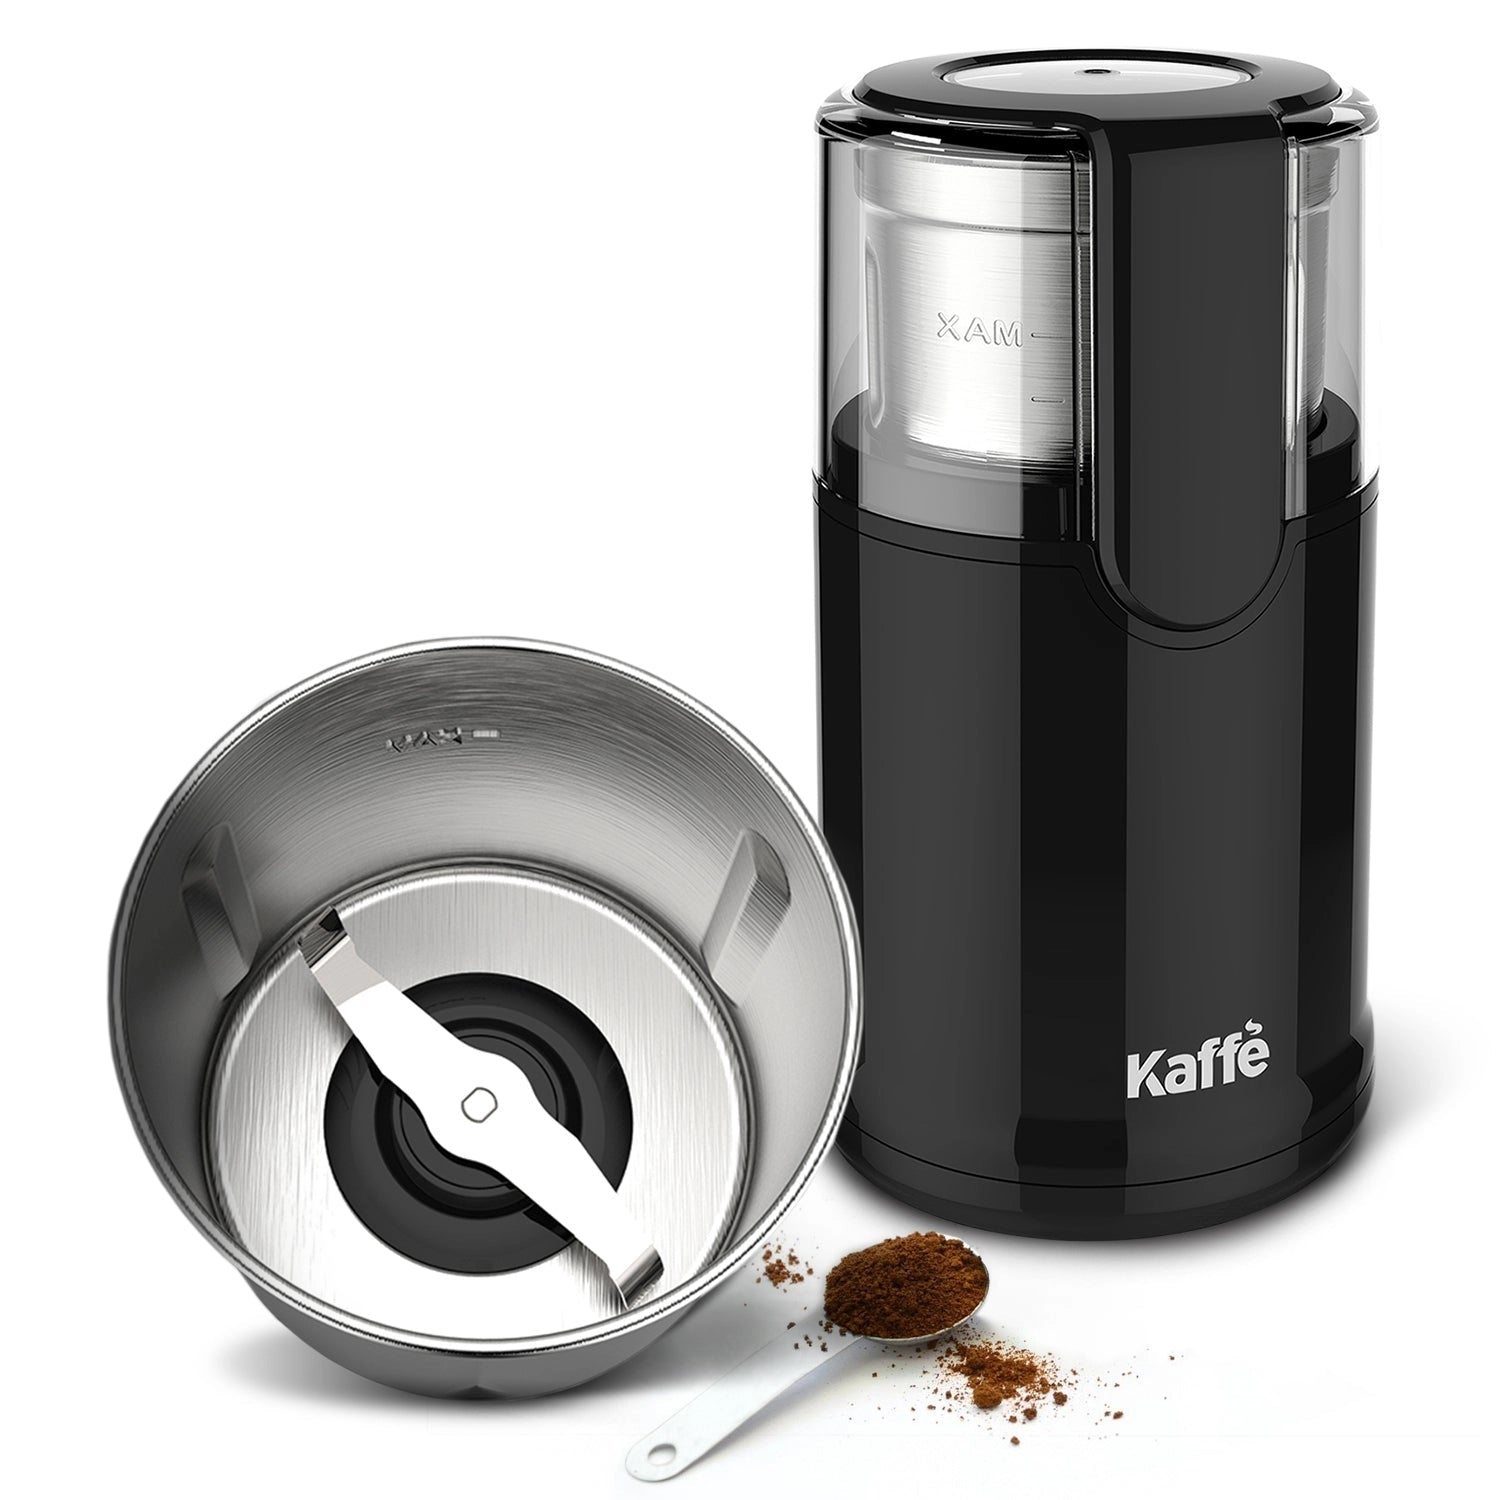 Krups Electric Spice and Coffee Grinder - White